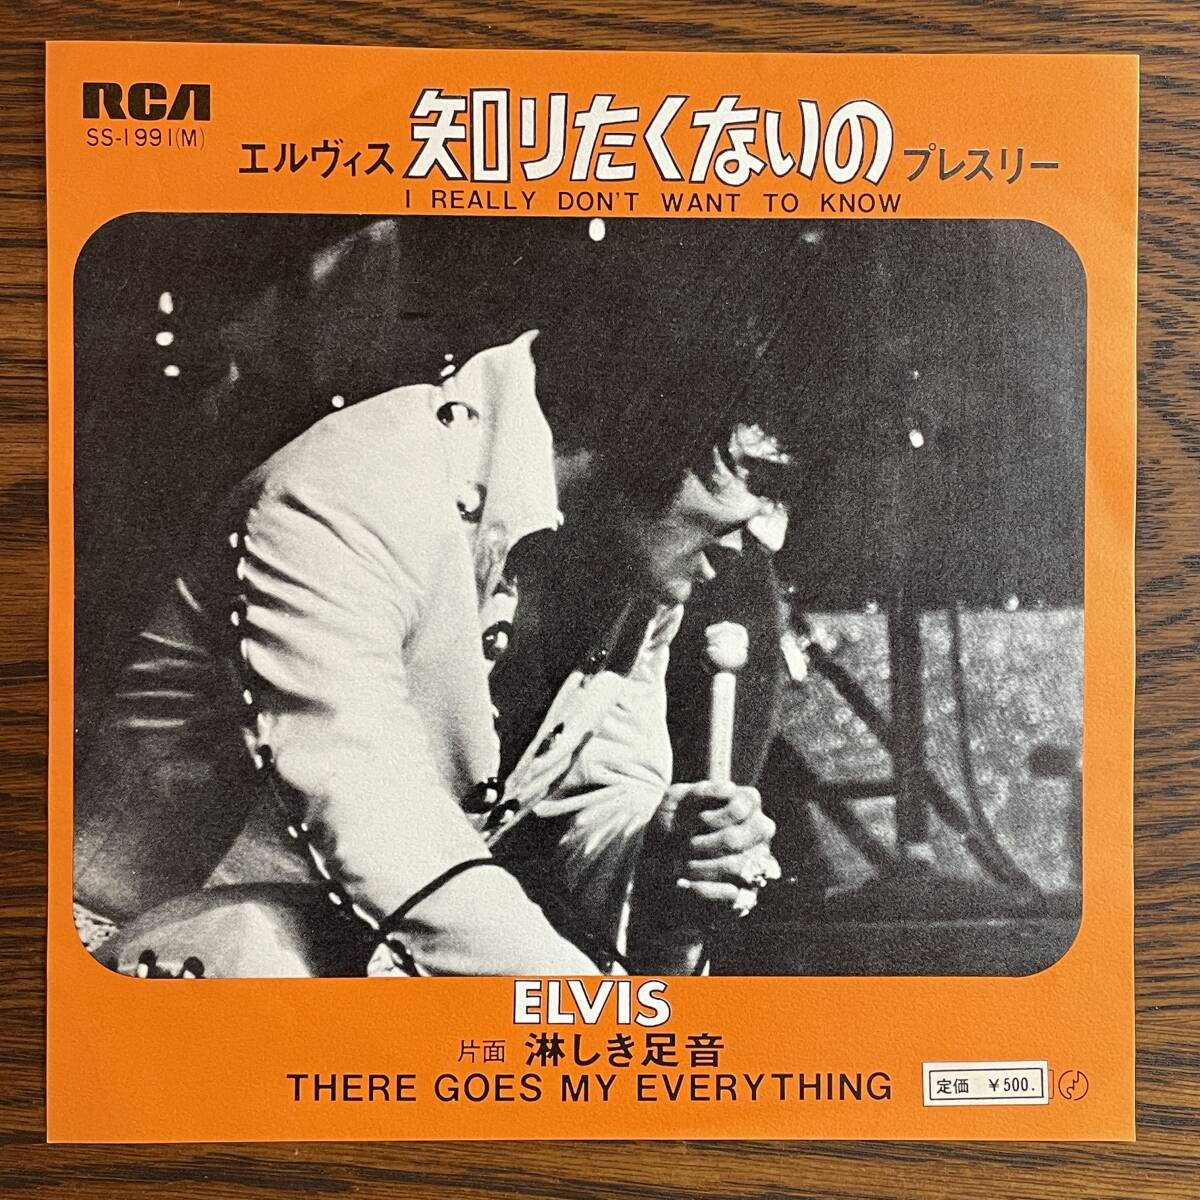 【EP】エルヴィス・プレスリー - 知りたくないの [SS-1991] Elvis Presley I Really Don't Want To Know シングル_画像2